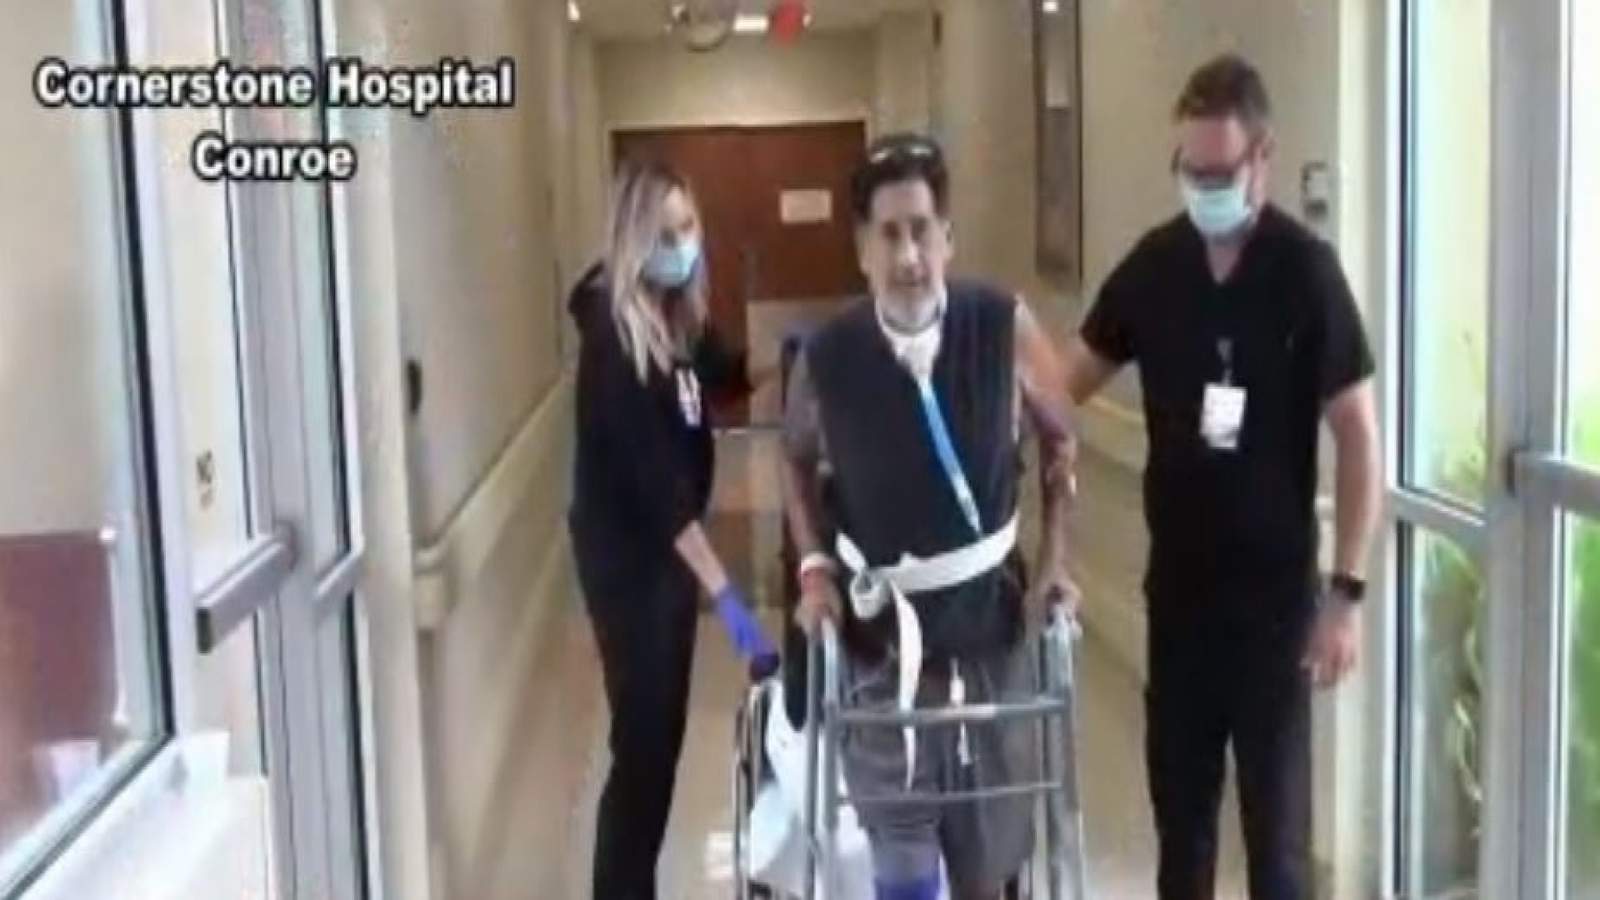 HPD Sgt. released from hospital after monthslong battle with COVID-19